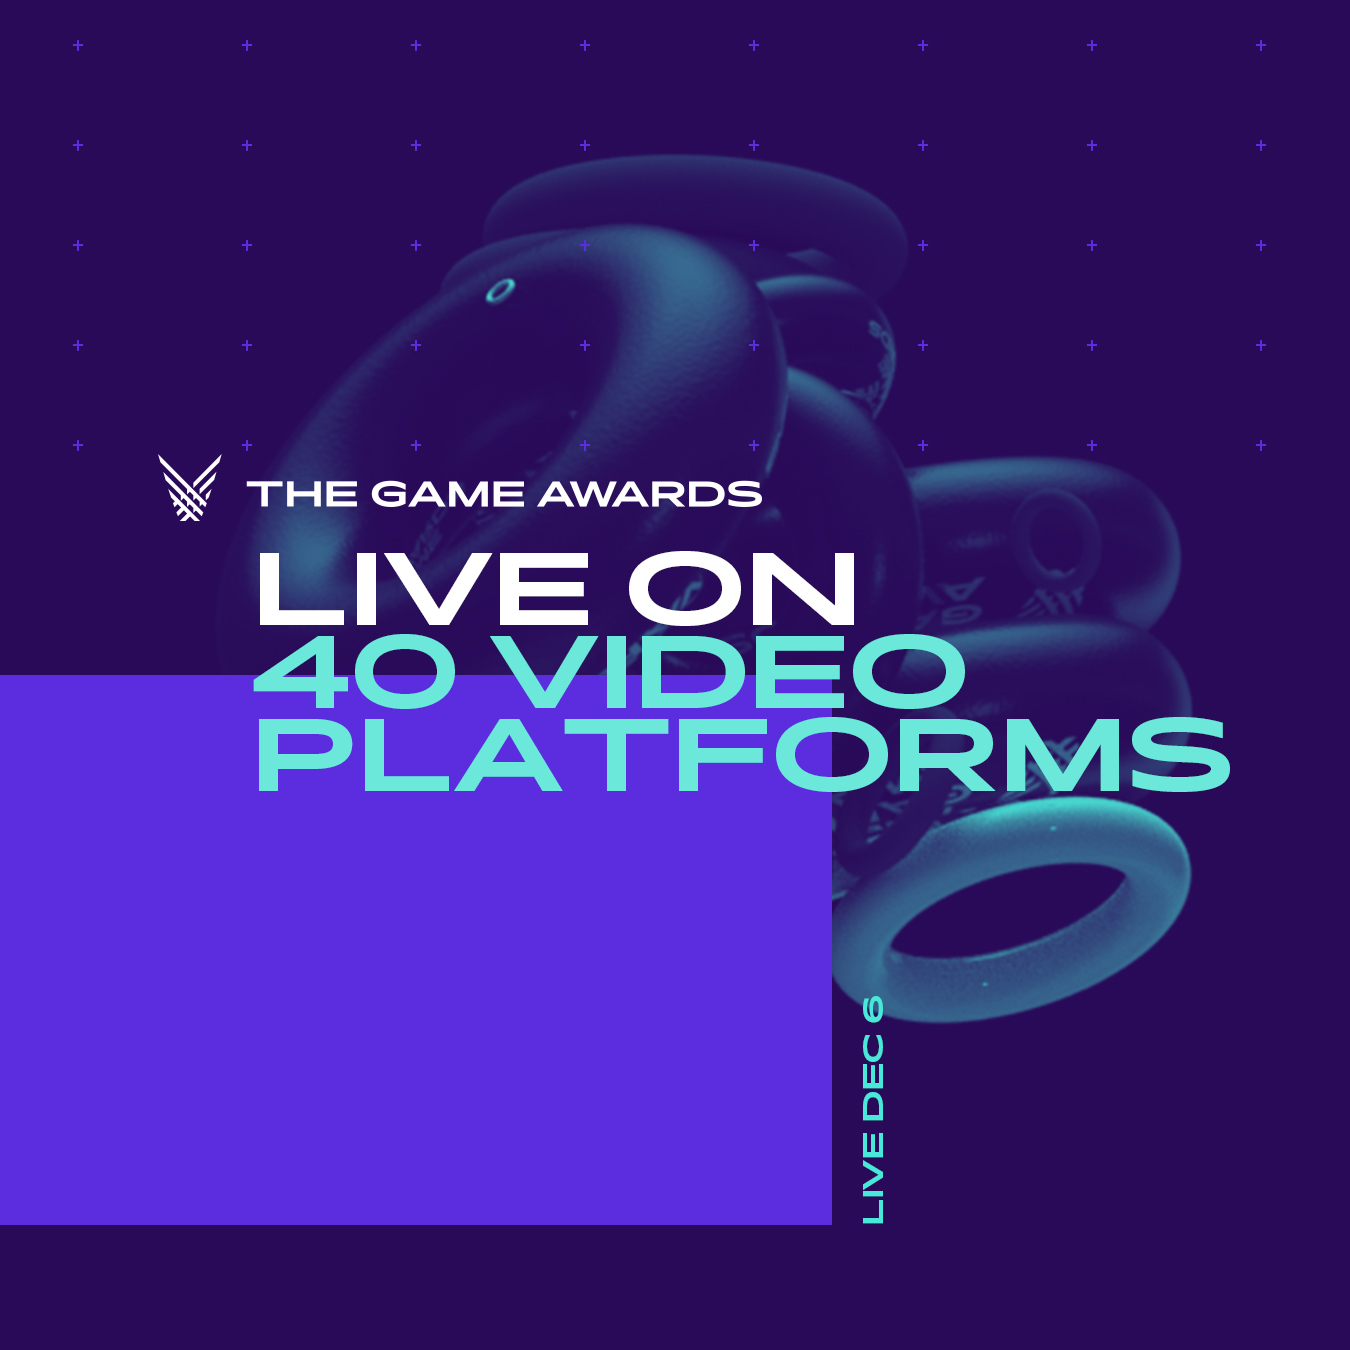 The 2018 Game Awards will stream live on December 6th